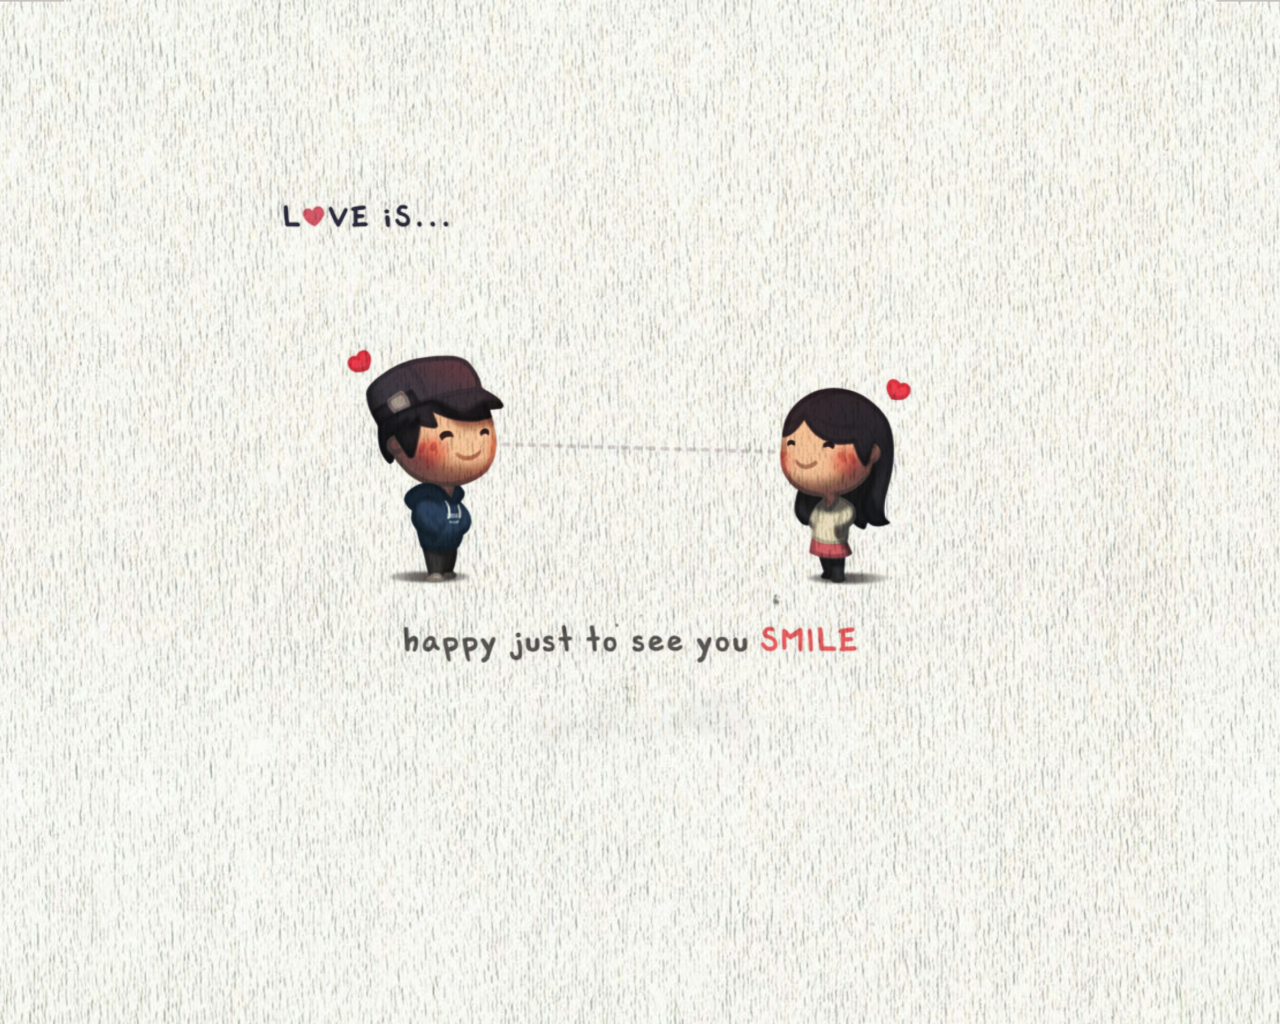 Love Is Happy Just To See You Smile wallpaper 1280x1024